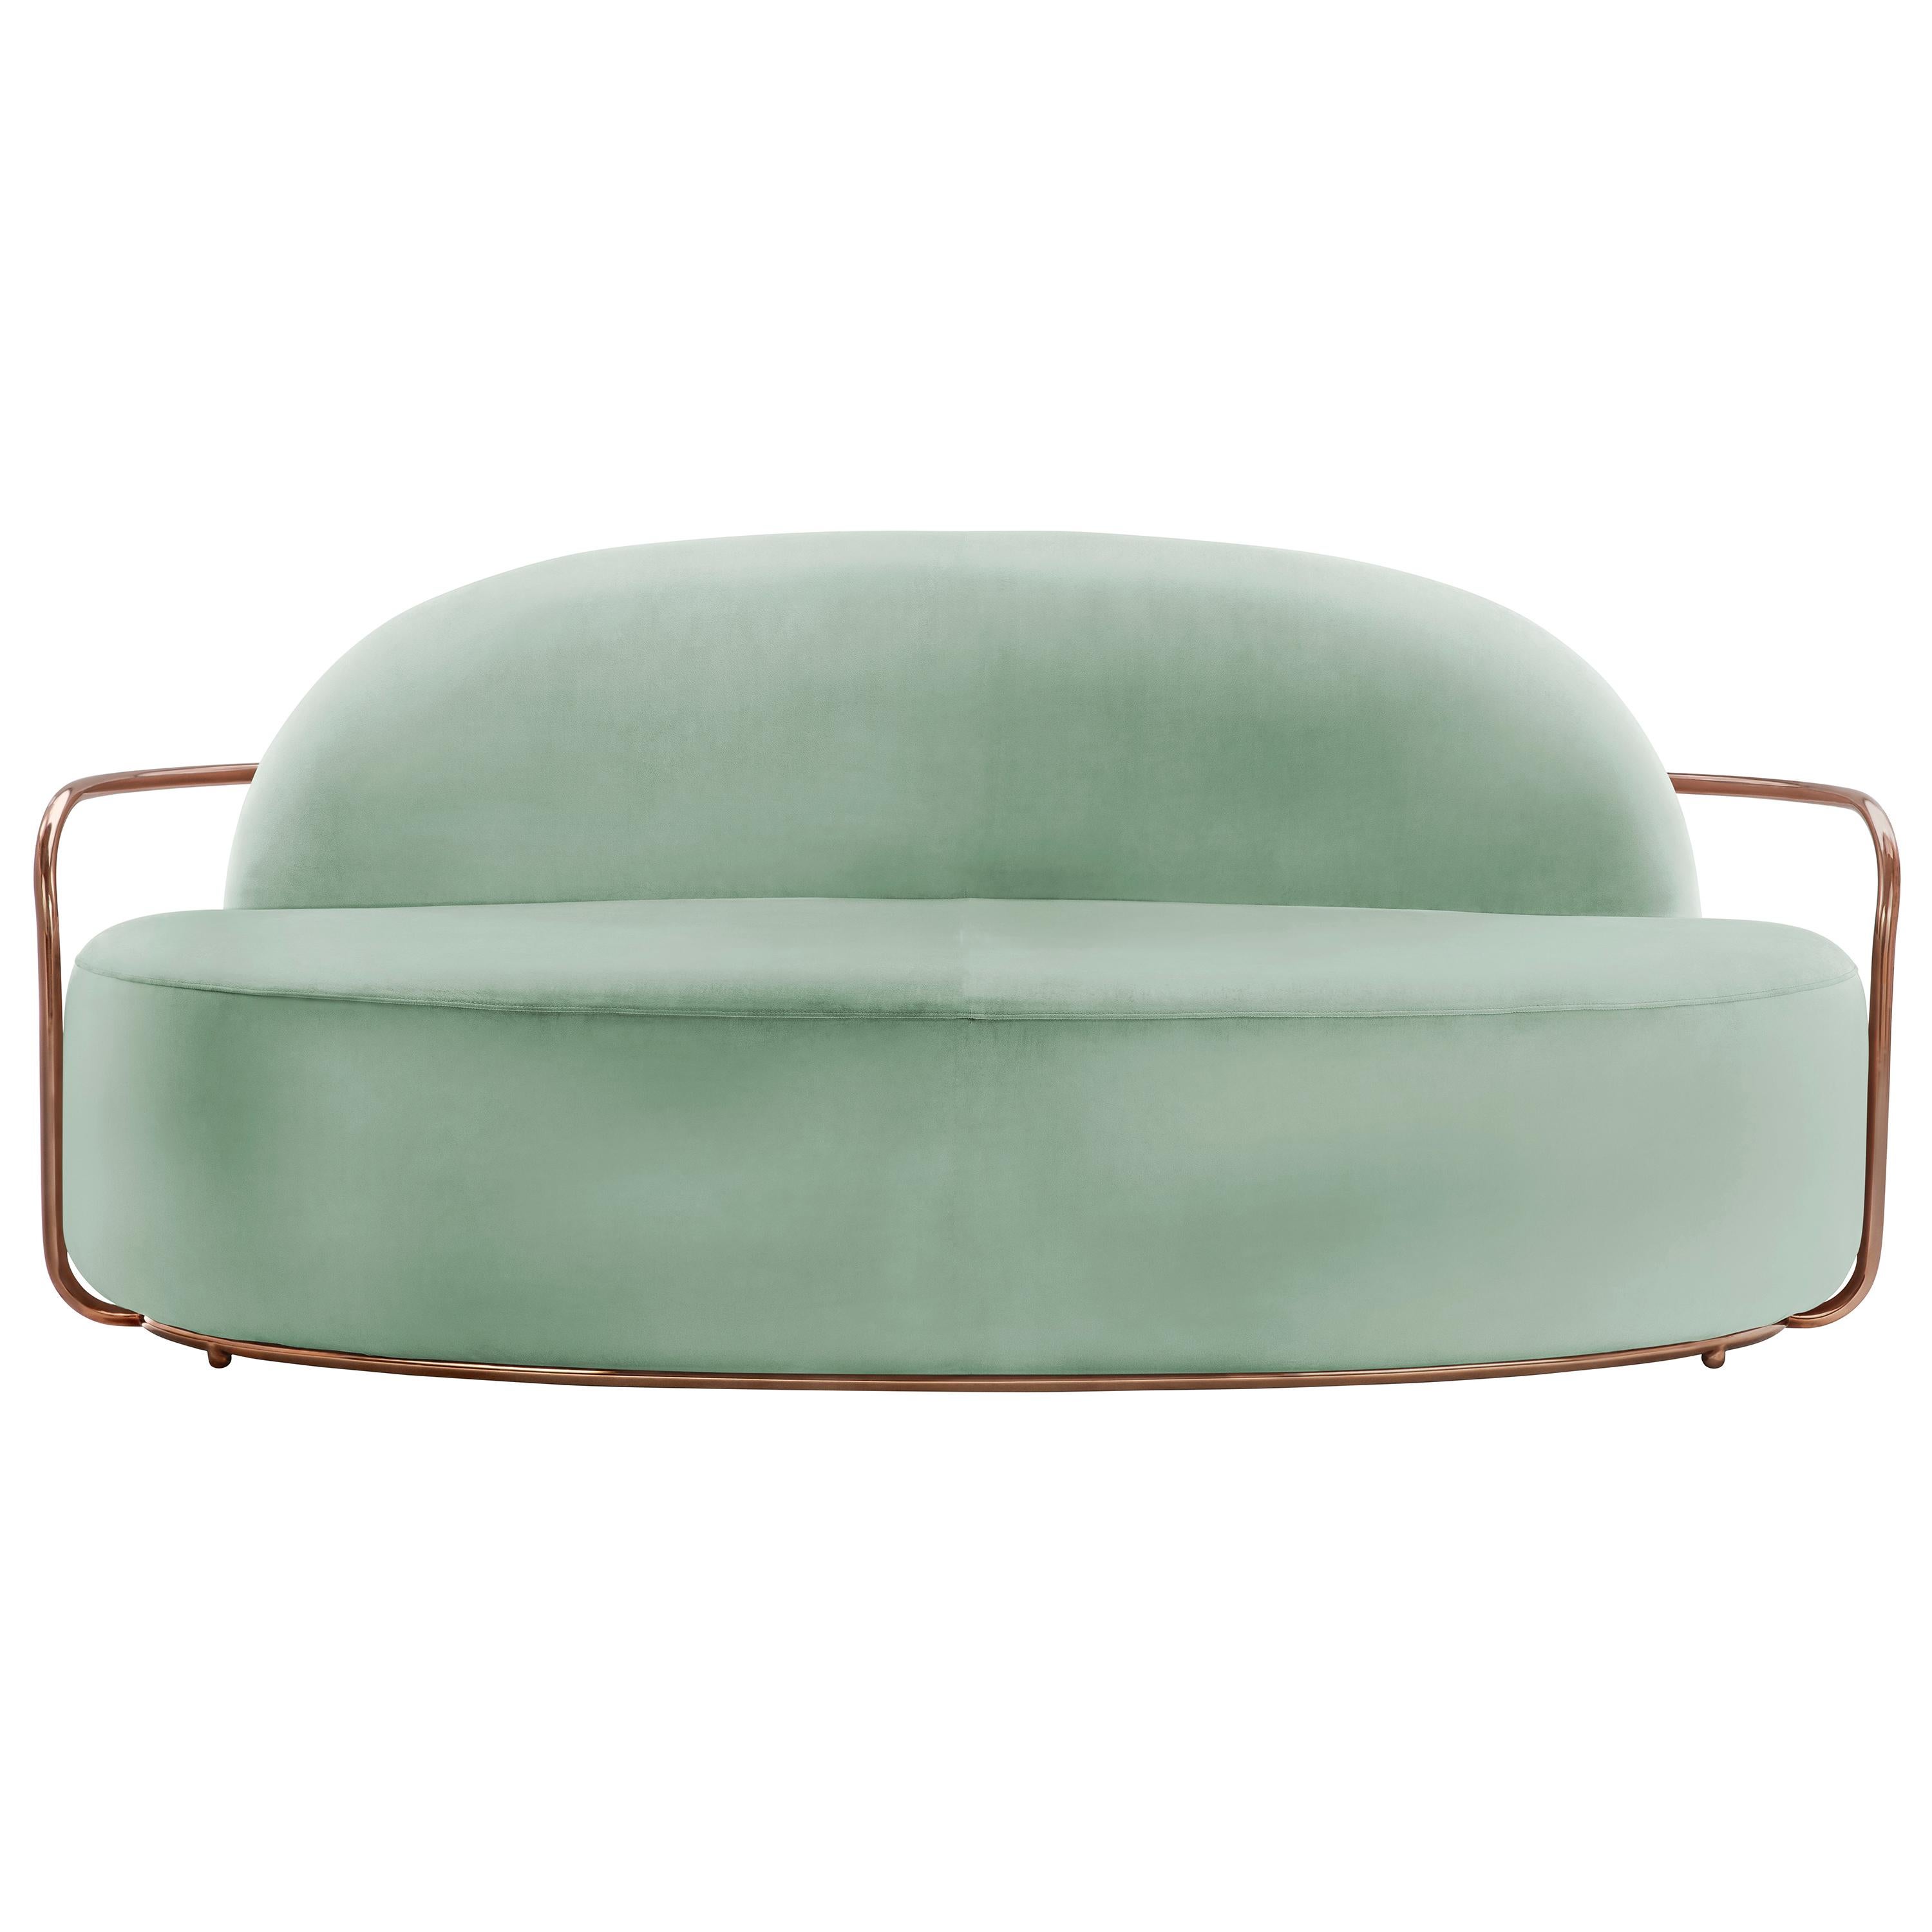 Orion 3 Seat Sofa with Plush Mint Green Velvet and Rose Gold Arms by Nika  Zupanc For Sale at 1stDibs | mint green sofa, mint green couch, mint green  velvet sofa